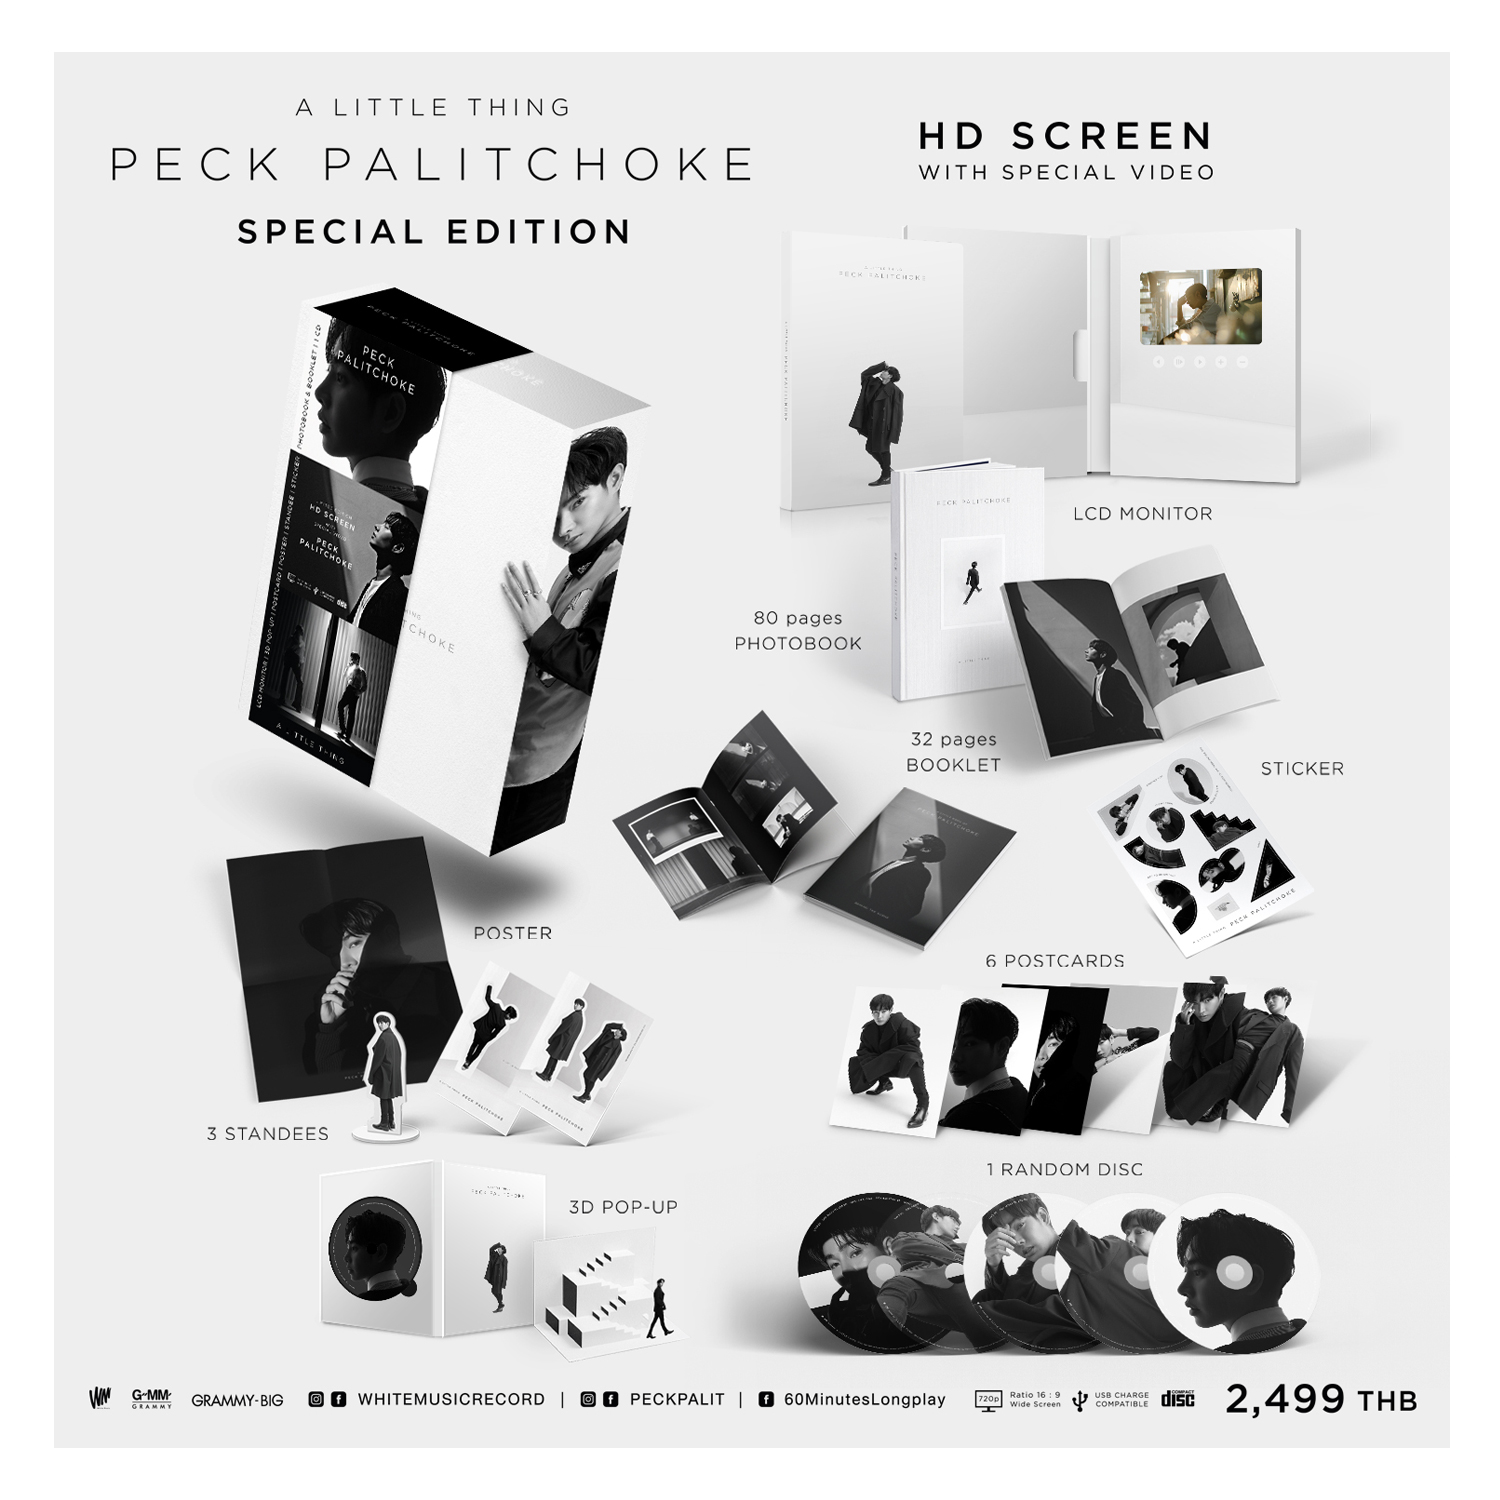 GMM GRAMMY **Special Edition** CDBoxset Peck Palitchoke อัลบั้ม A LITTLE THING